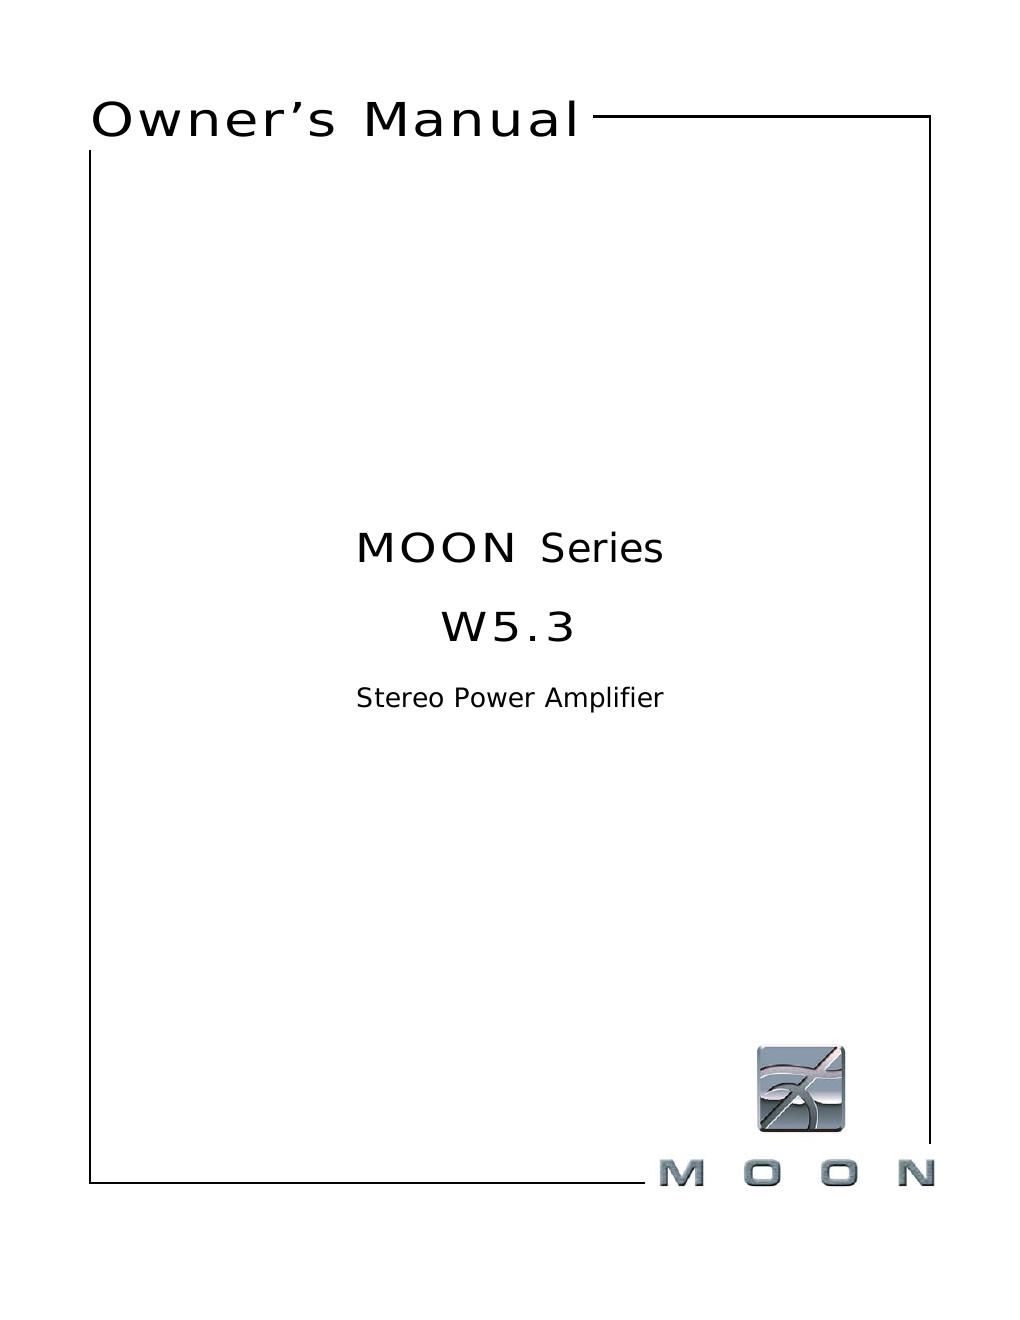 moon w 5 3 owners manual